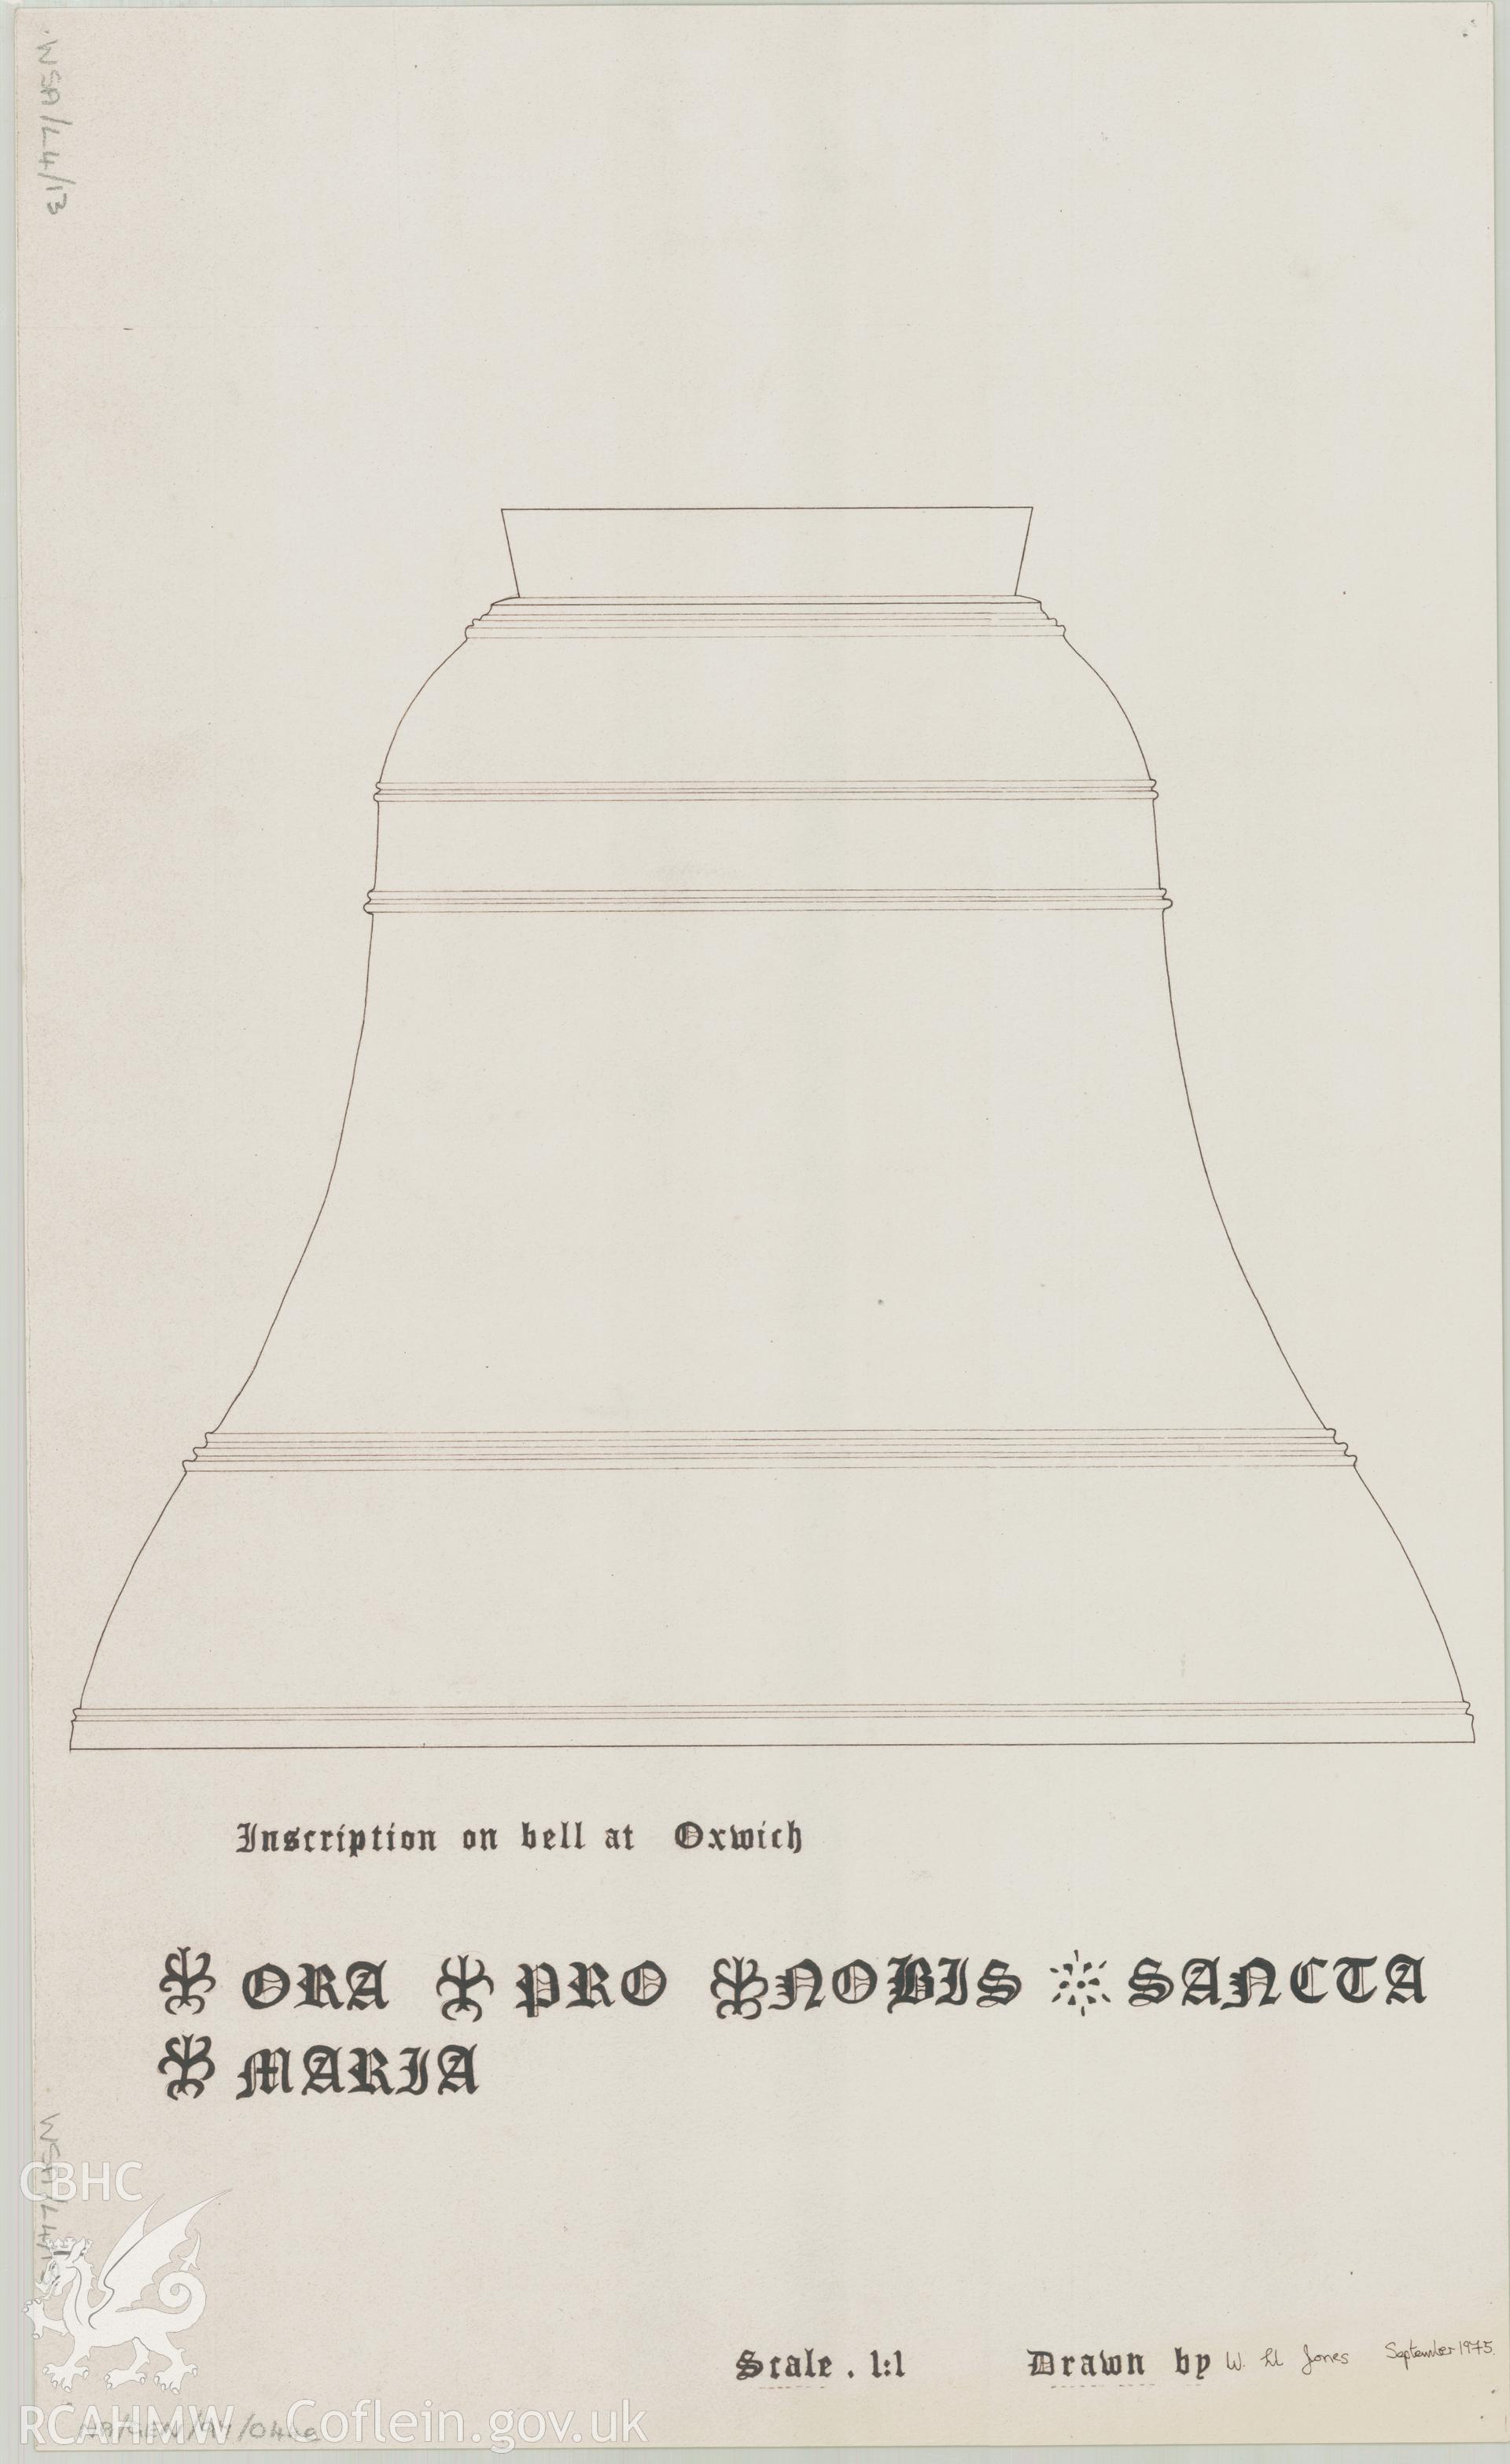 Measured drawing showing detail of the bell at St Illtyd's Church, Oxwich, produced by W.Ll. Jones, September 1975.